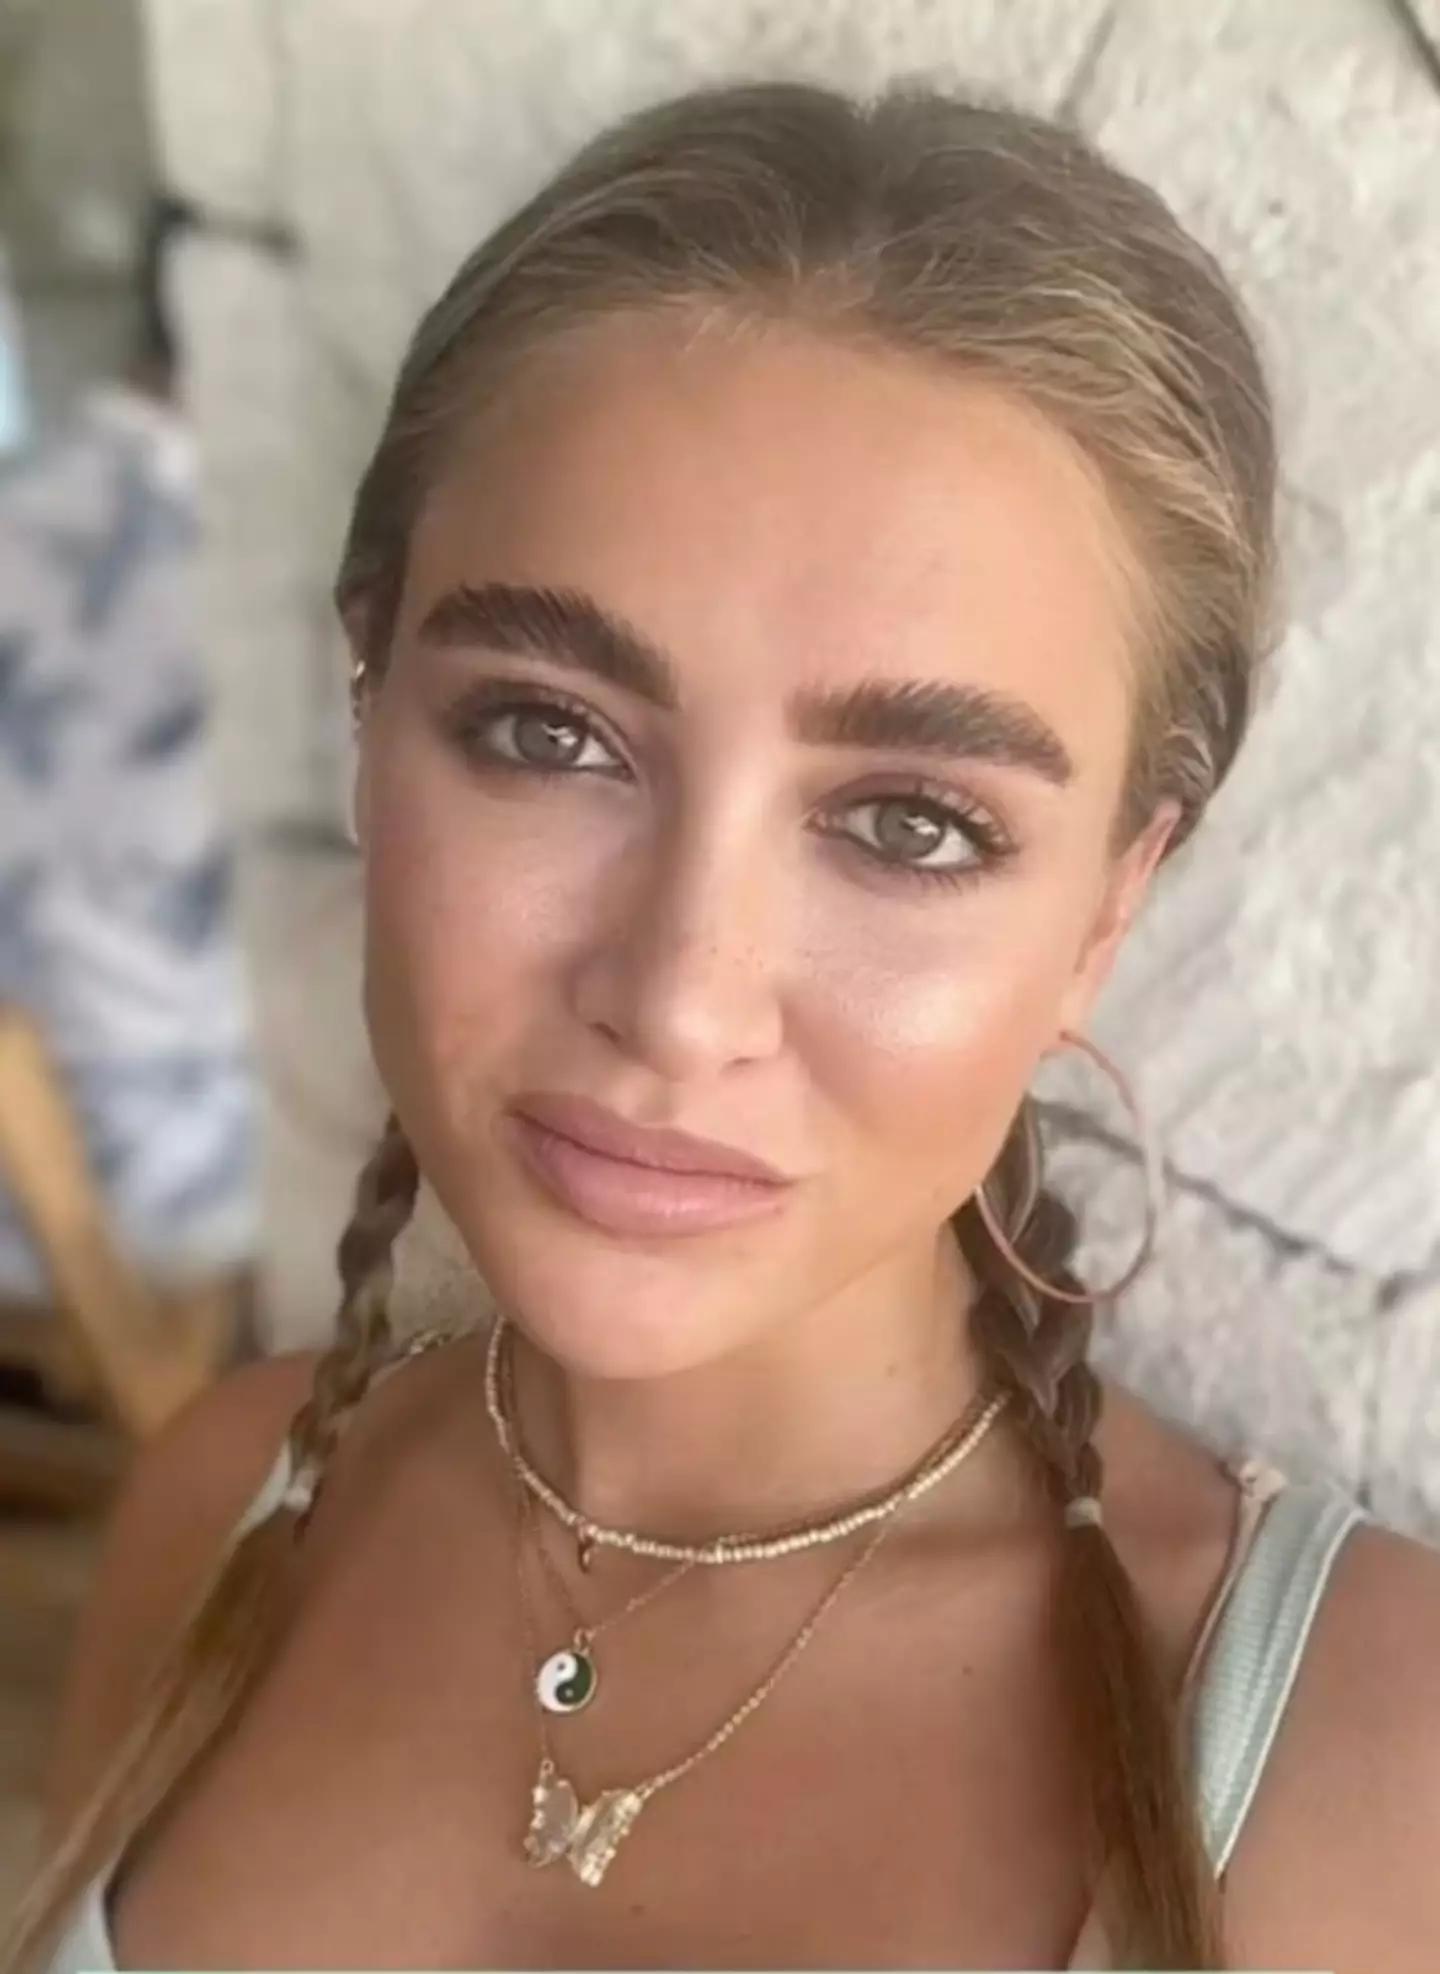 The Love Island star thanked those who stood by her and supported her along the way.